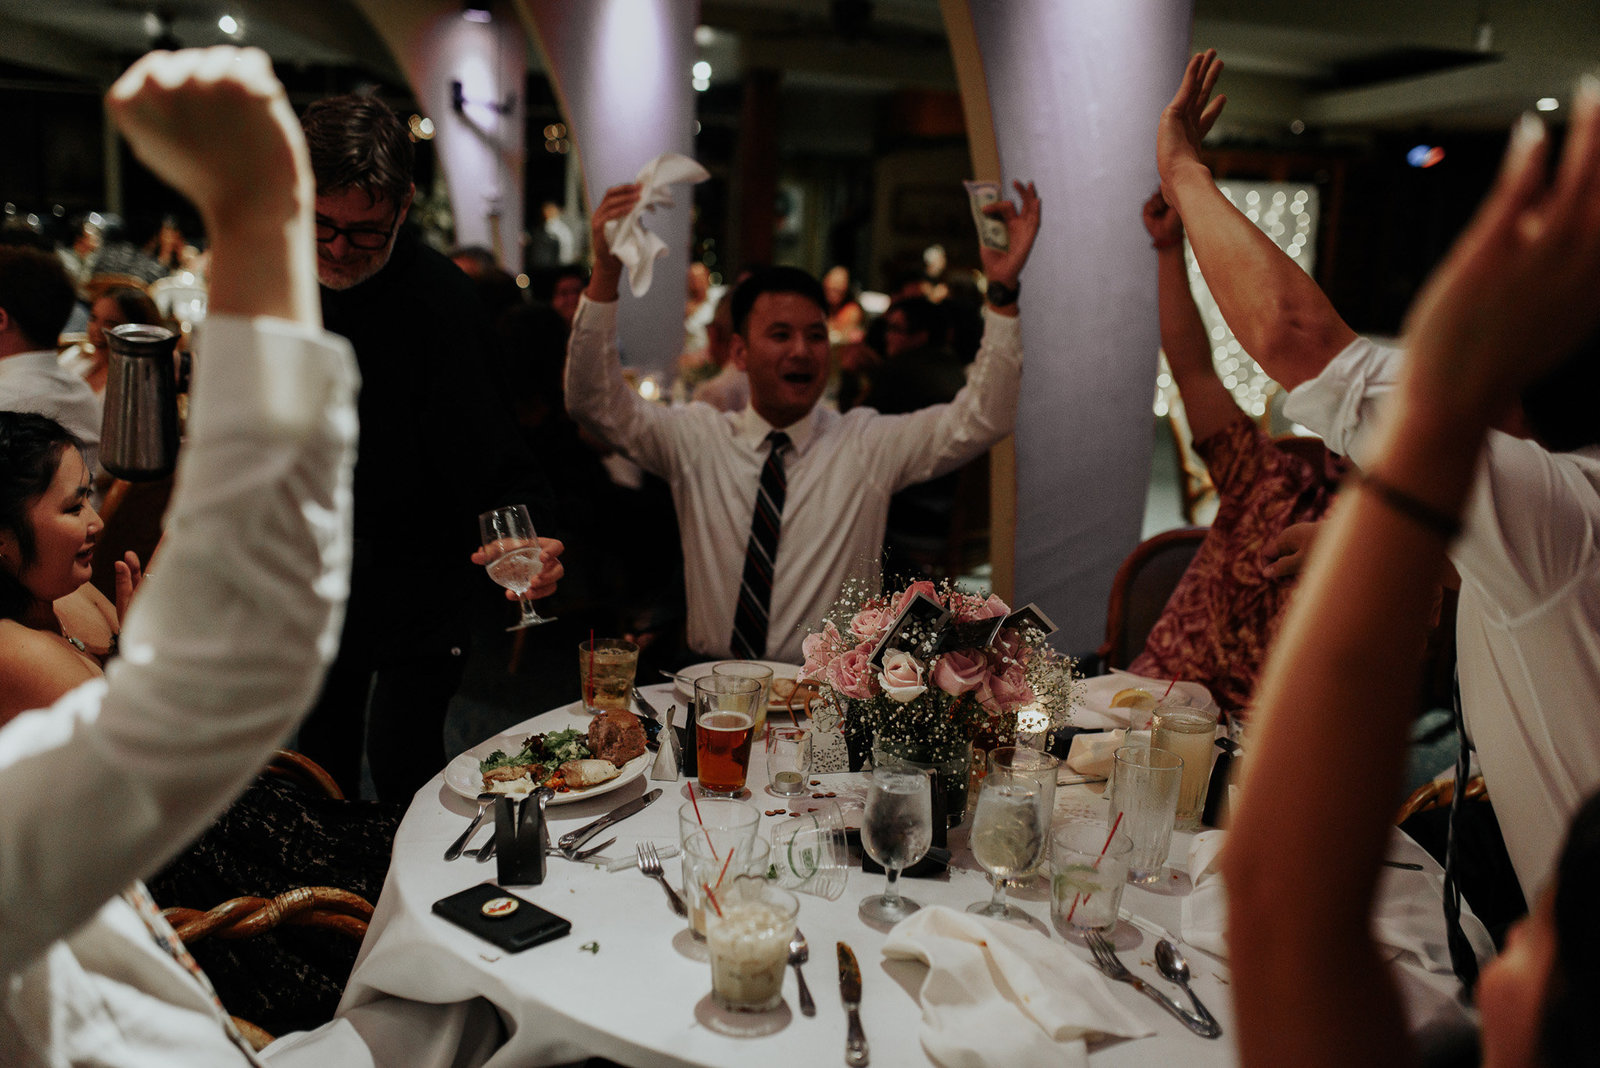 fun photo of the wedding party dancing and celebrating